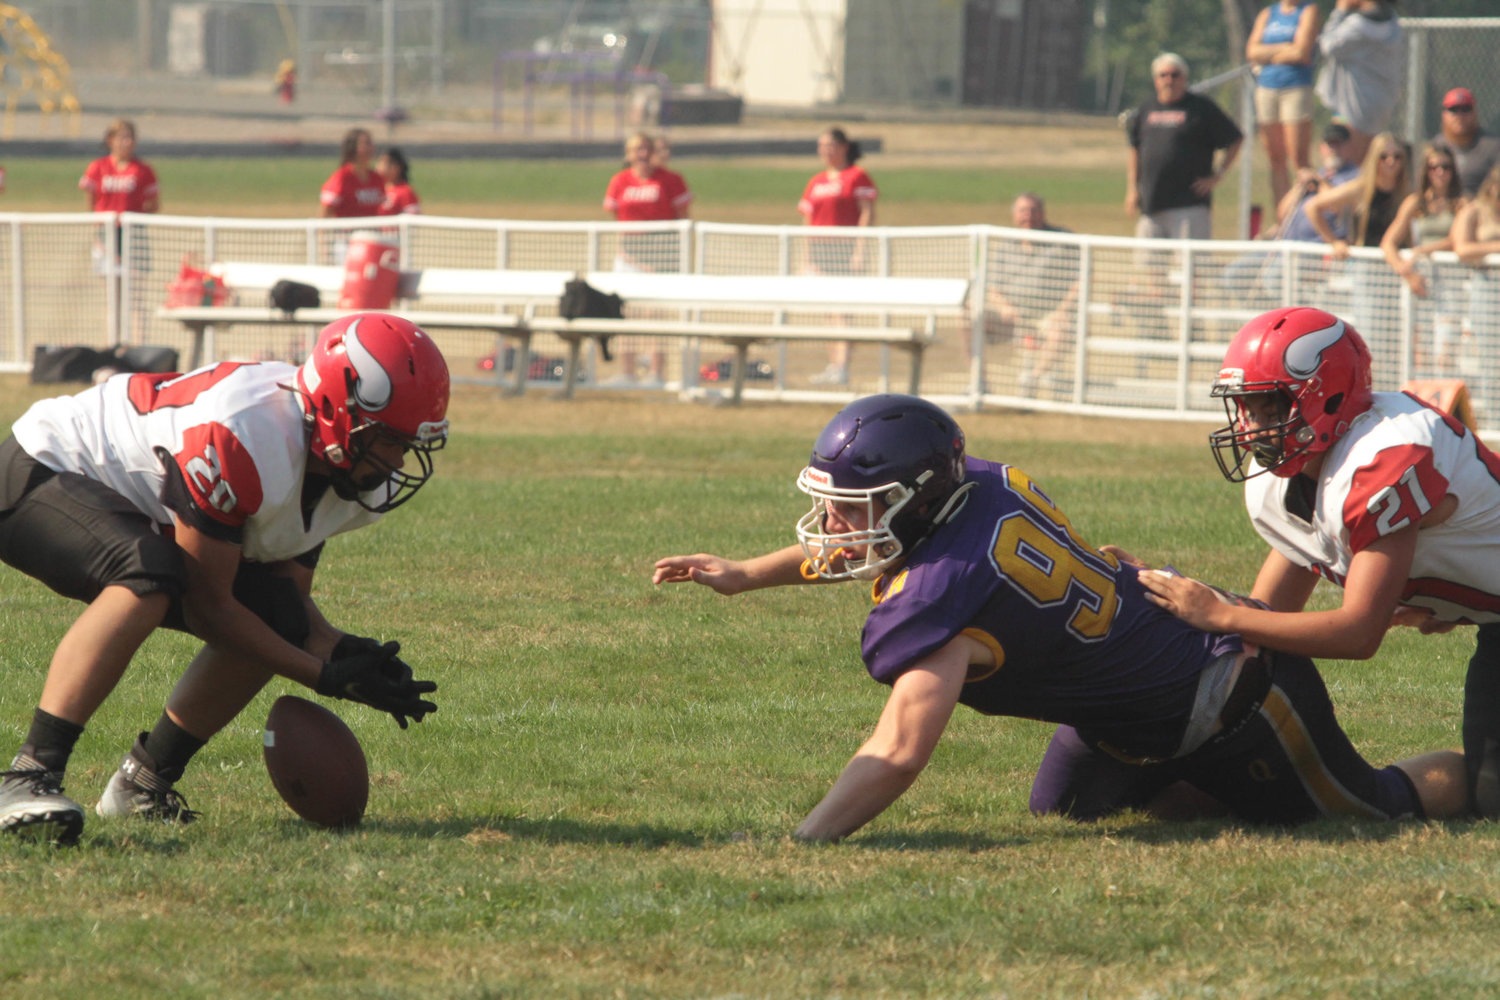 Maxx Budnek reaches out to recover a fumble in action against the Vikings.